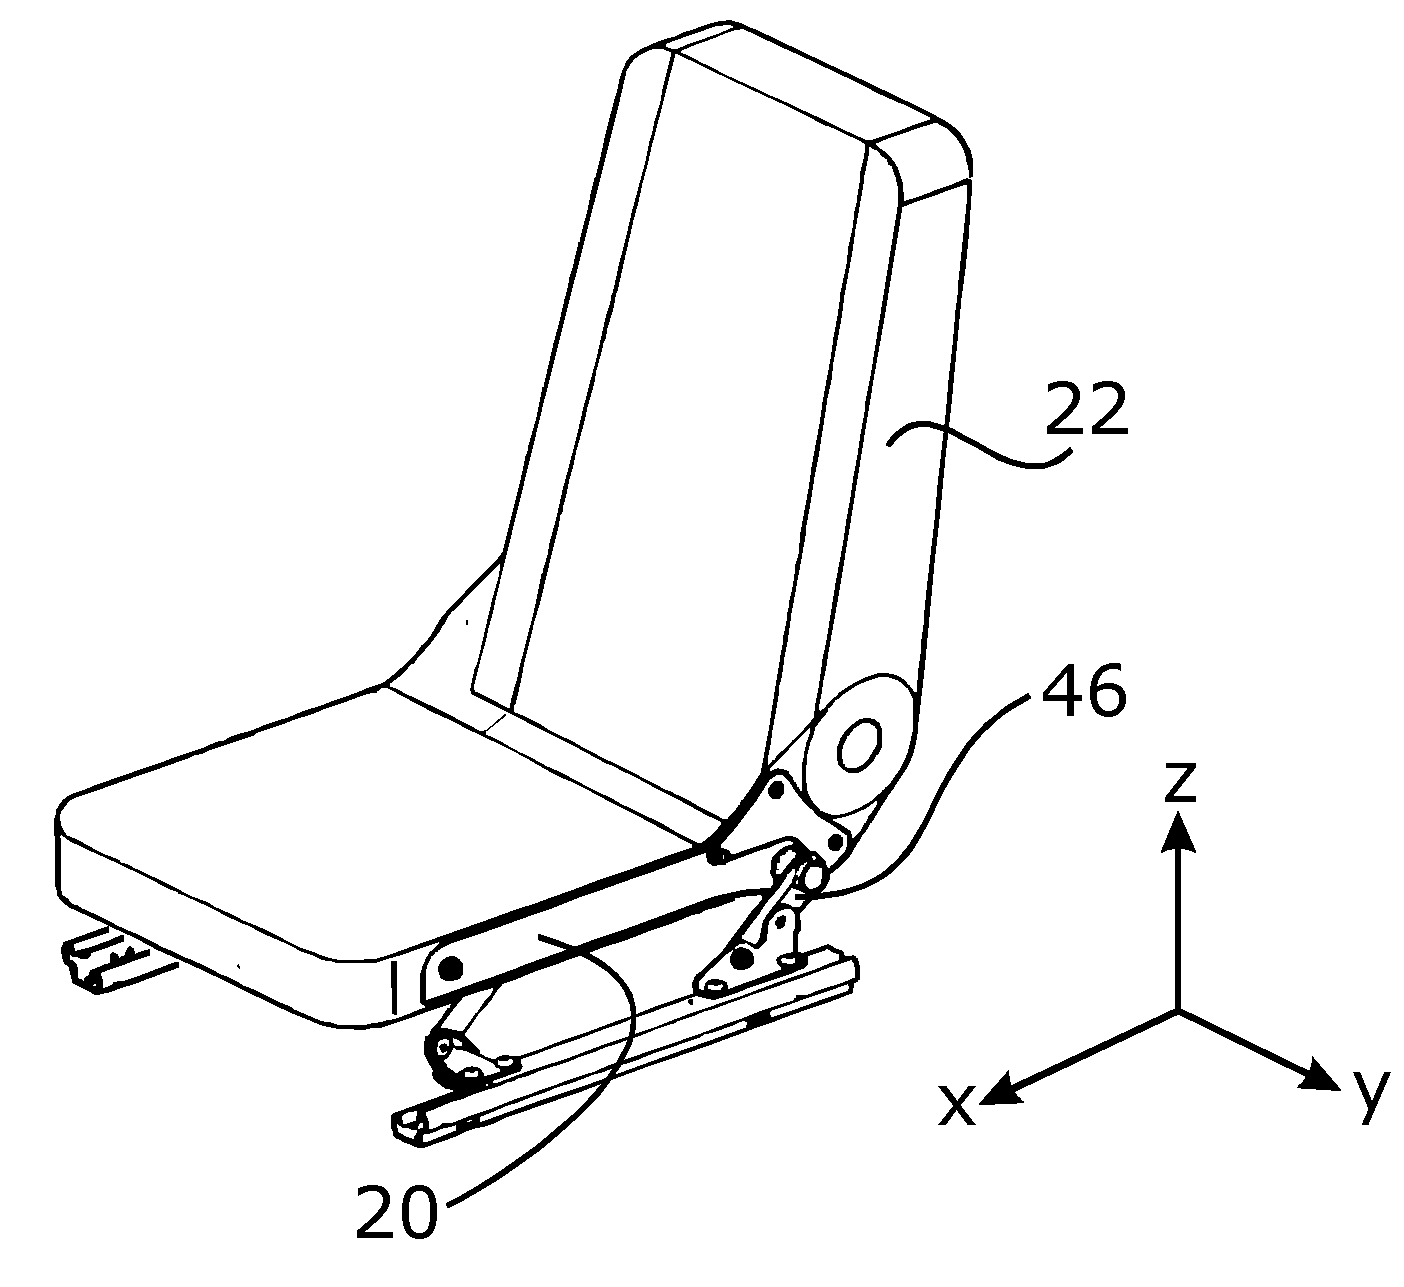 Frame side part of a vehicle seat